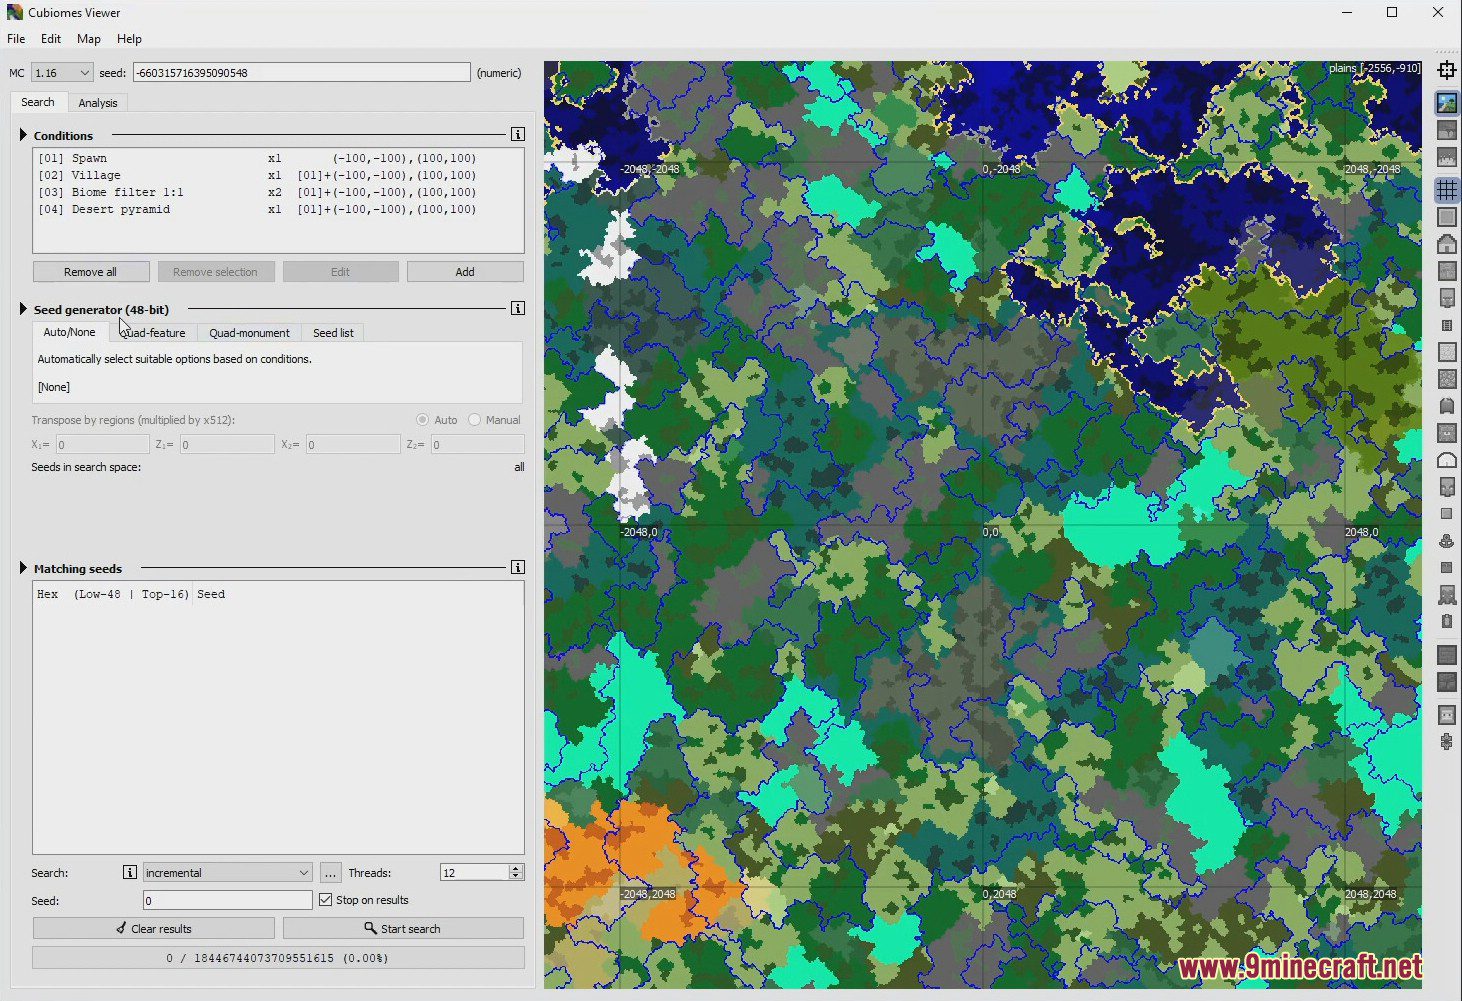 Cubiomes Viewer (1.21, 1.20.1) - Minecraft Seed Finder and Map Viewer 4